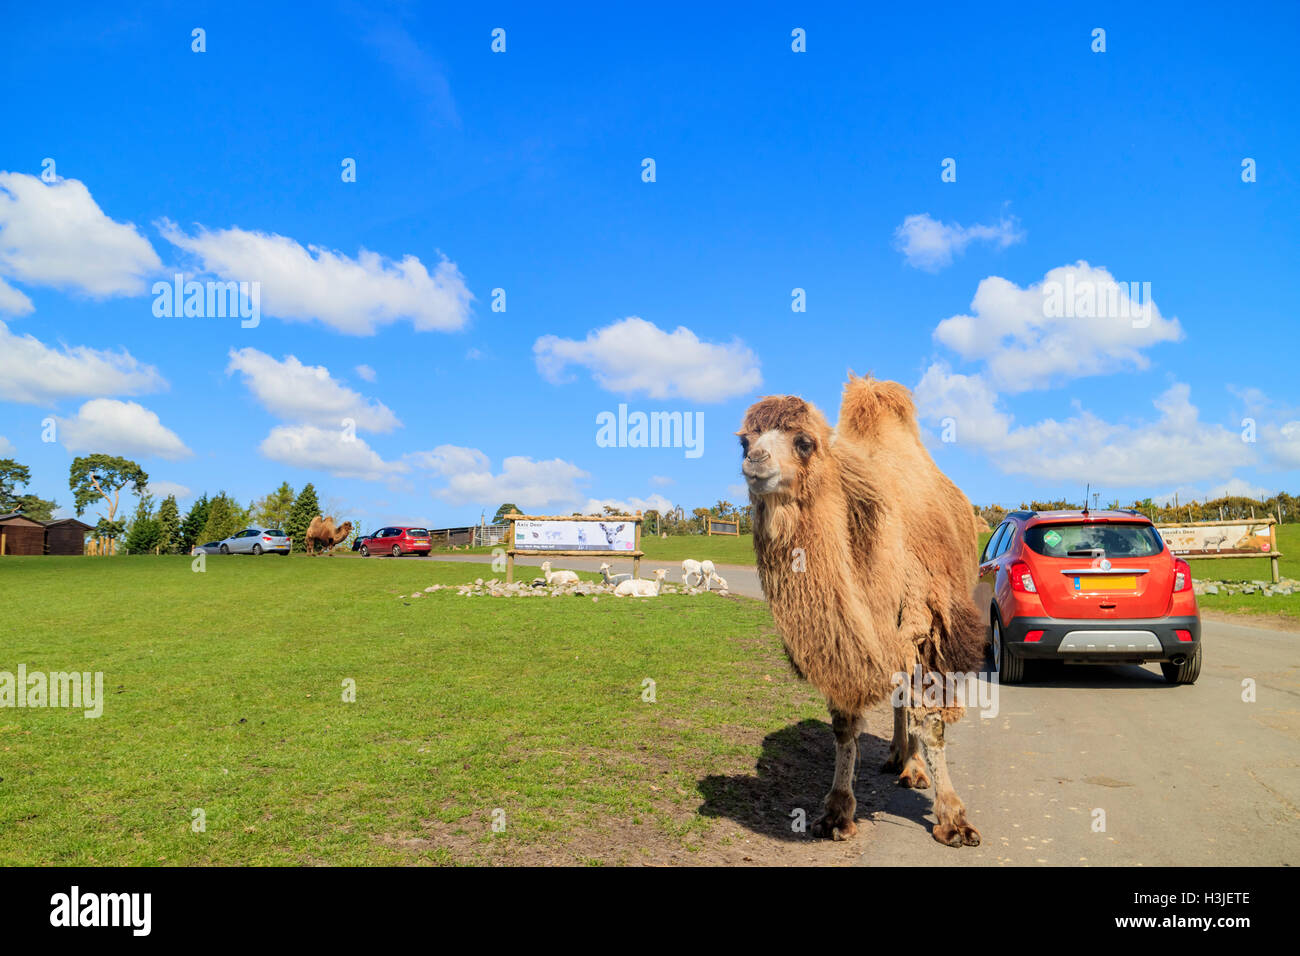 Spring Grove, APR 23: Camel in the beautiful West Midland Safari Park on APR 23, 2016 at Spring Grove, United Kingdom Stock Photo